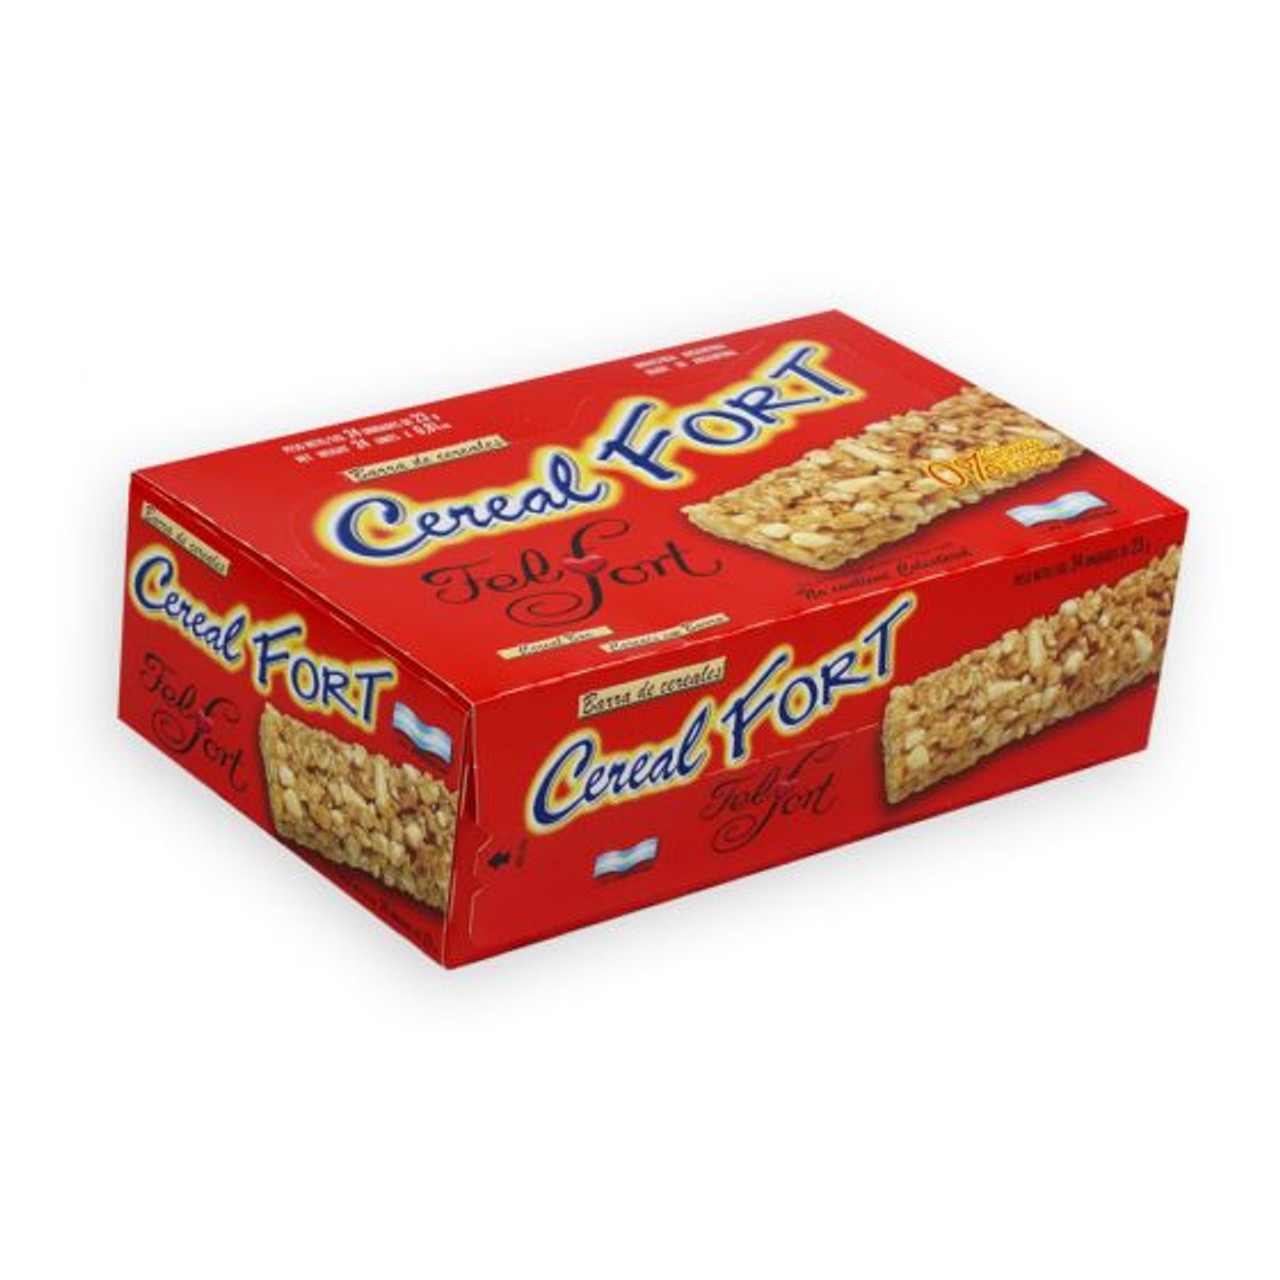 Cereal FORT Classic Cereal Bar by Felfort, 24 x 23 g / 24 x  oz